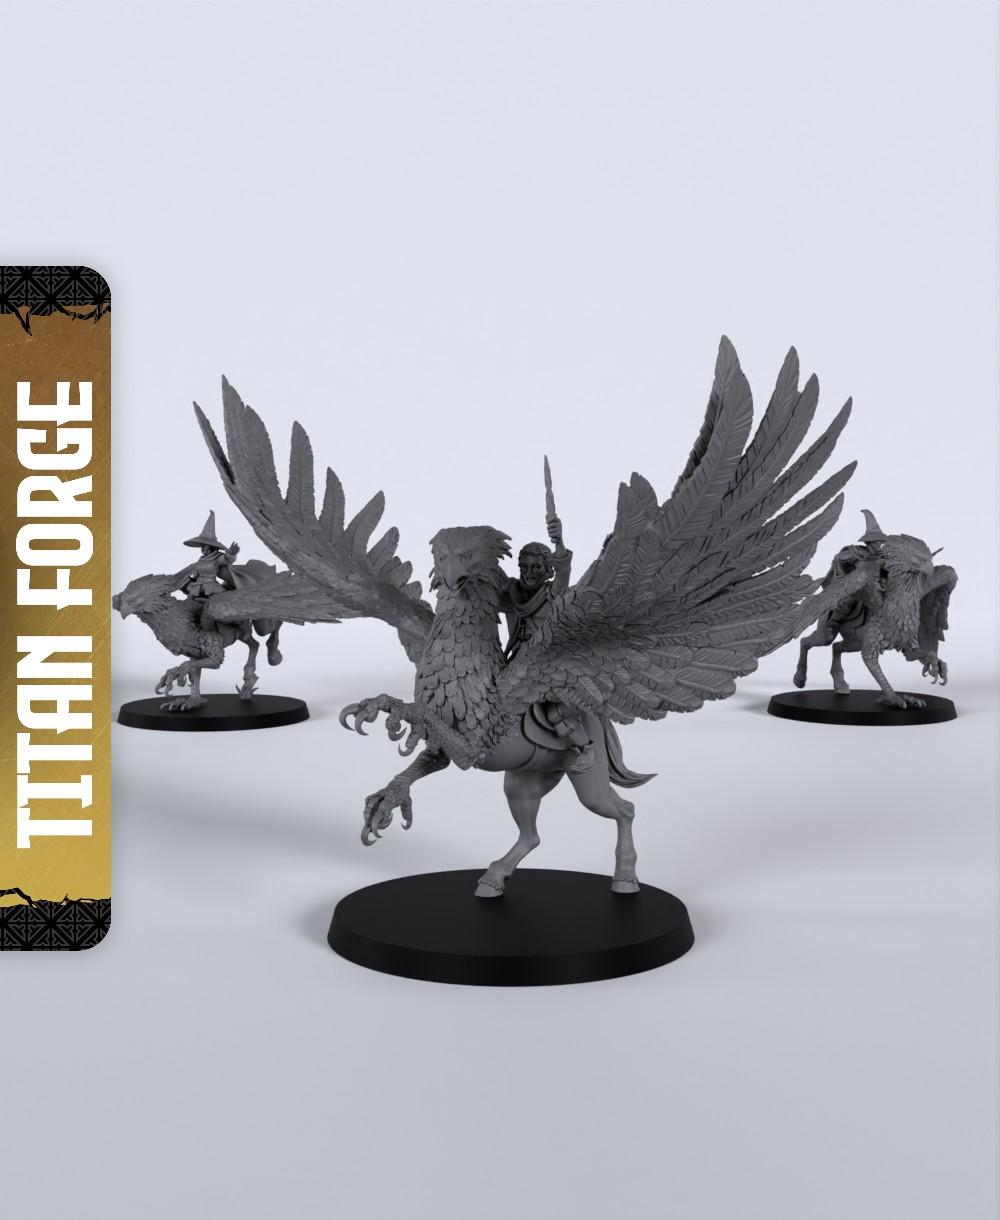 Hippogryphs - With Free Dragon Warhammer - 5e DnD Inspired for RPG and Wargamers 3d model